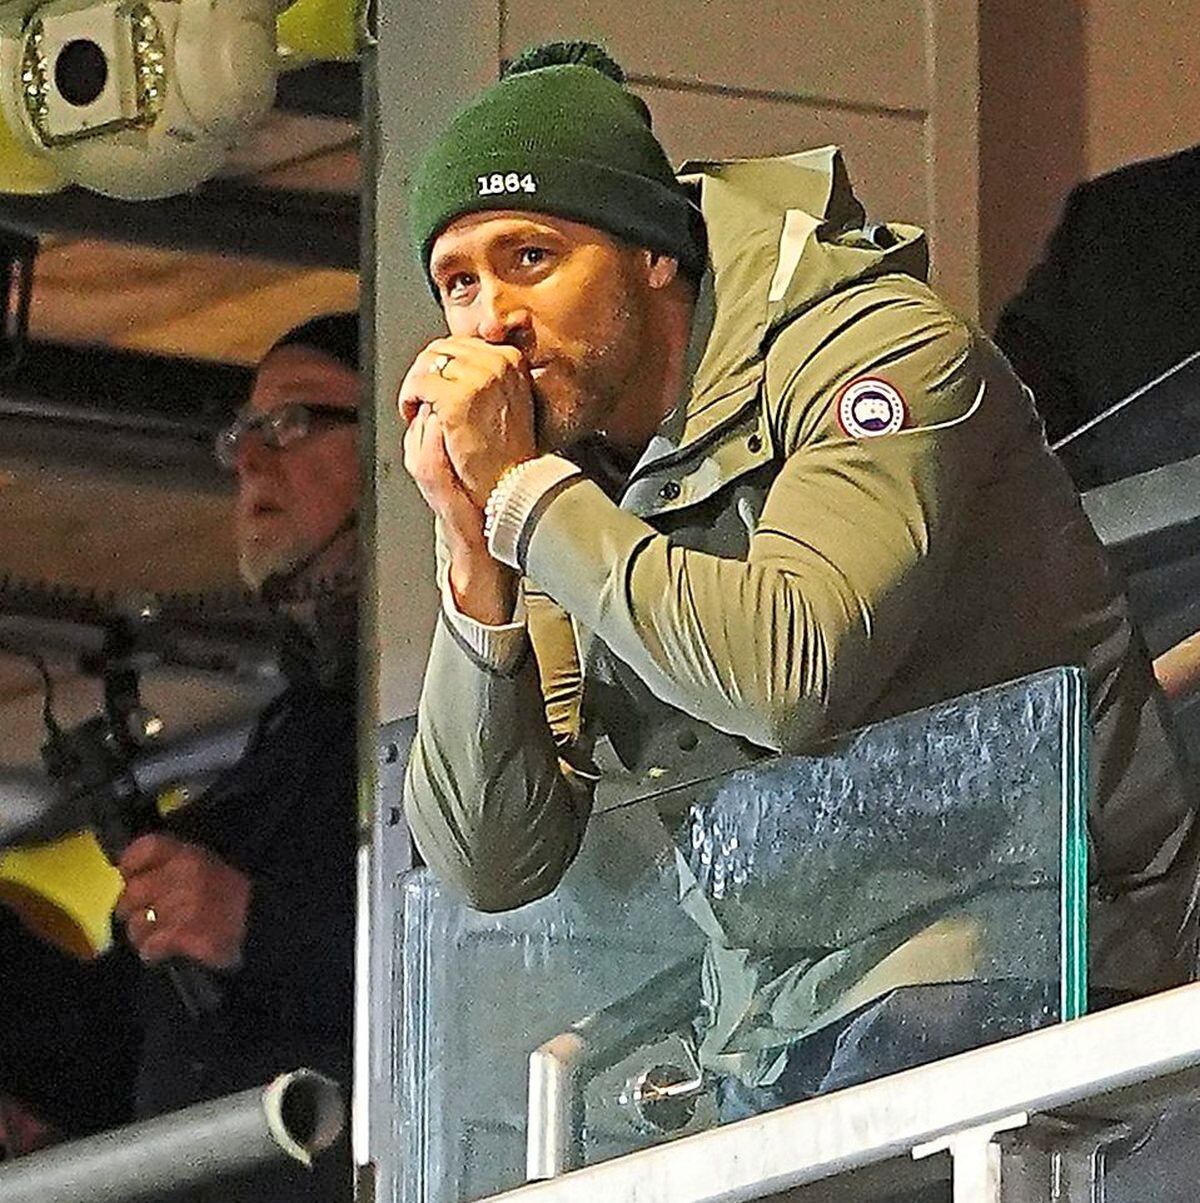 
              
Wrexham co-owner Ryan Reynolds reacts in the stands during the Emirates FA Cup fourth round match at The Racecourse Ground, Wrexham. Picture date: Sunday January 29, 2023. PA Photo. See PA story SOCCER Wrexham. Photo credit should read: Peter Byrne/PA Wire.


RESTRICTIONS: EDITORIAL USE ONLY 
No use with unauthorised audio, video, data, fixture lists, club/league logos or "live" services. Online in-match use limited to 120 images, no video emulation. No use in betting, games or single club/league/player publications.
            
